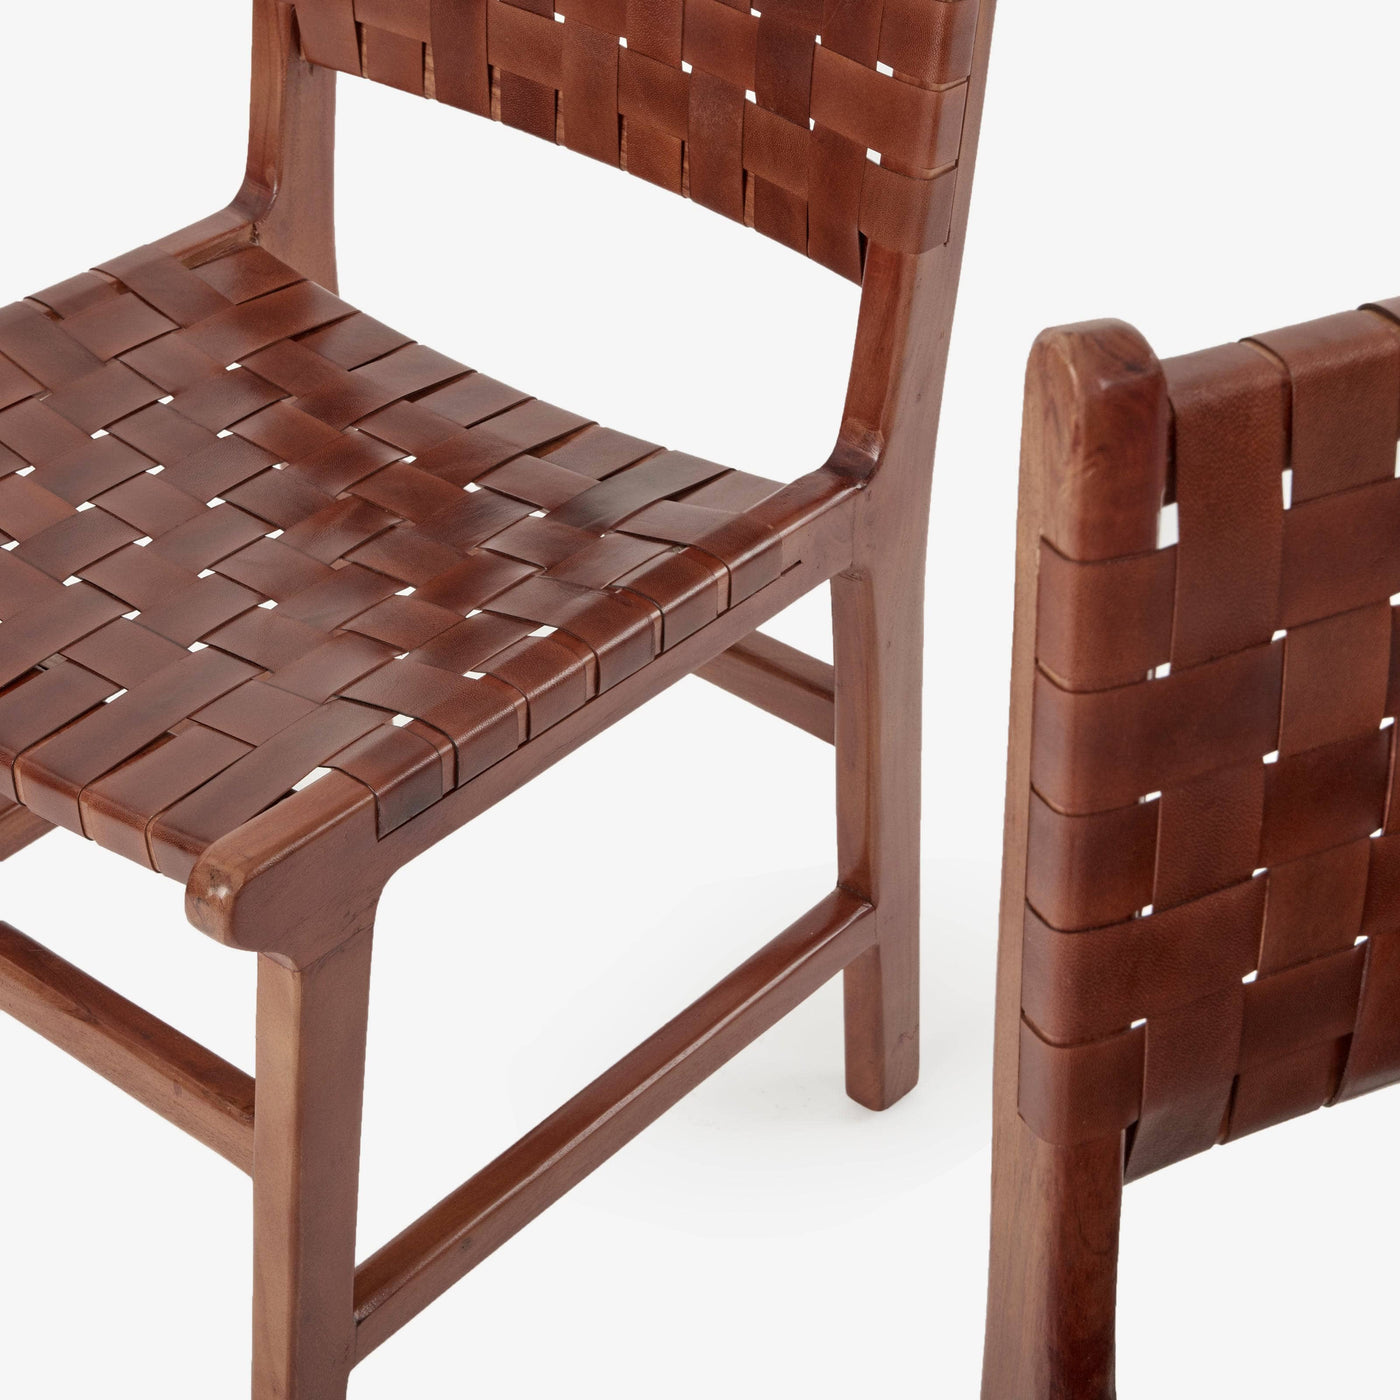 Pomero Woven Leather Dining Chair, Tan Dining Chairs & Benches sazy.com